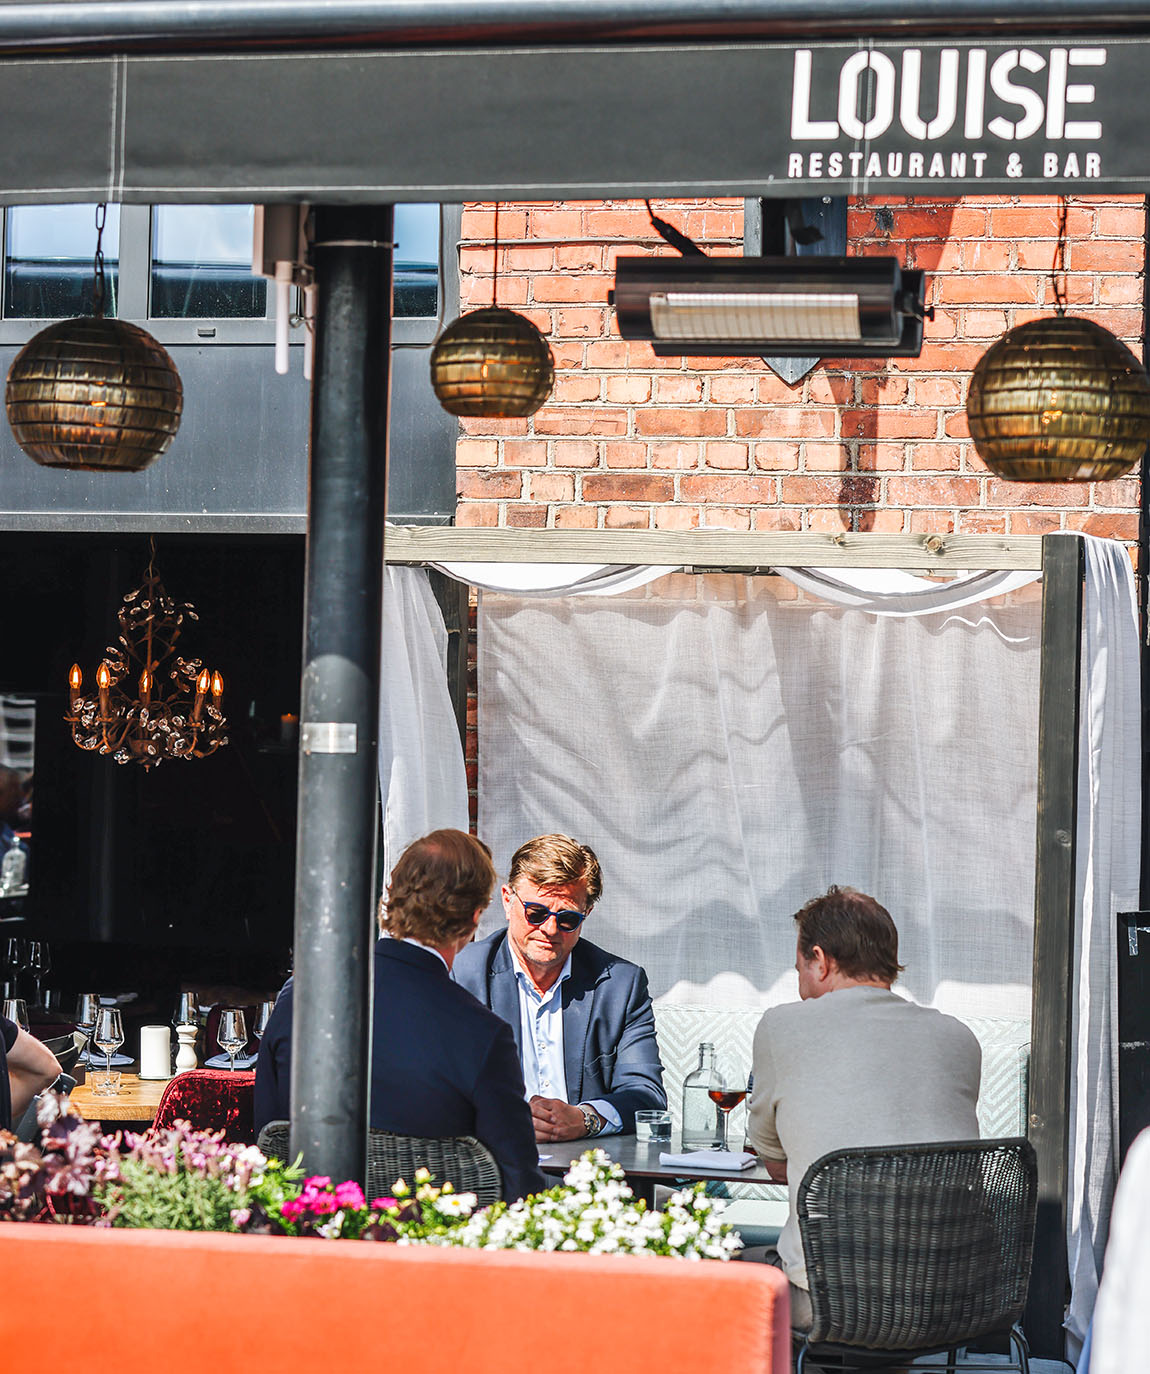 Louise Restaurant and Bar: Aker Brygge’s oldest restaurant is an unofficial institution